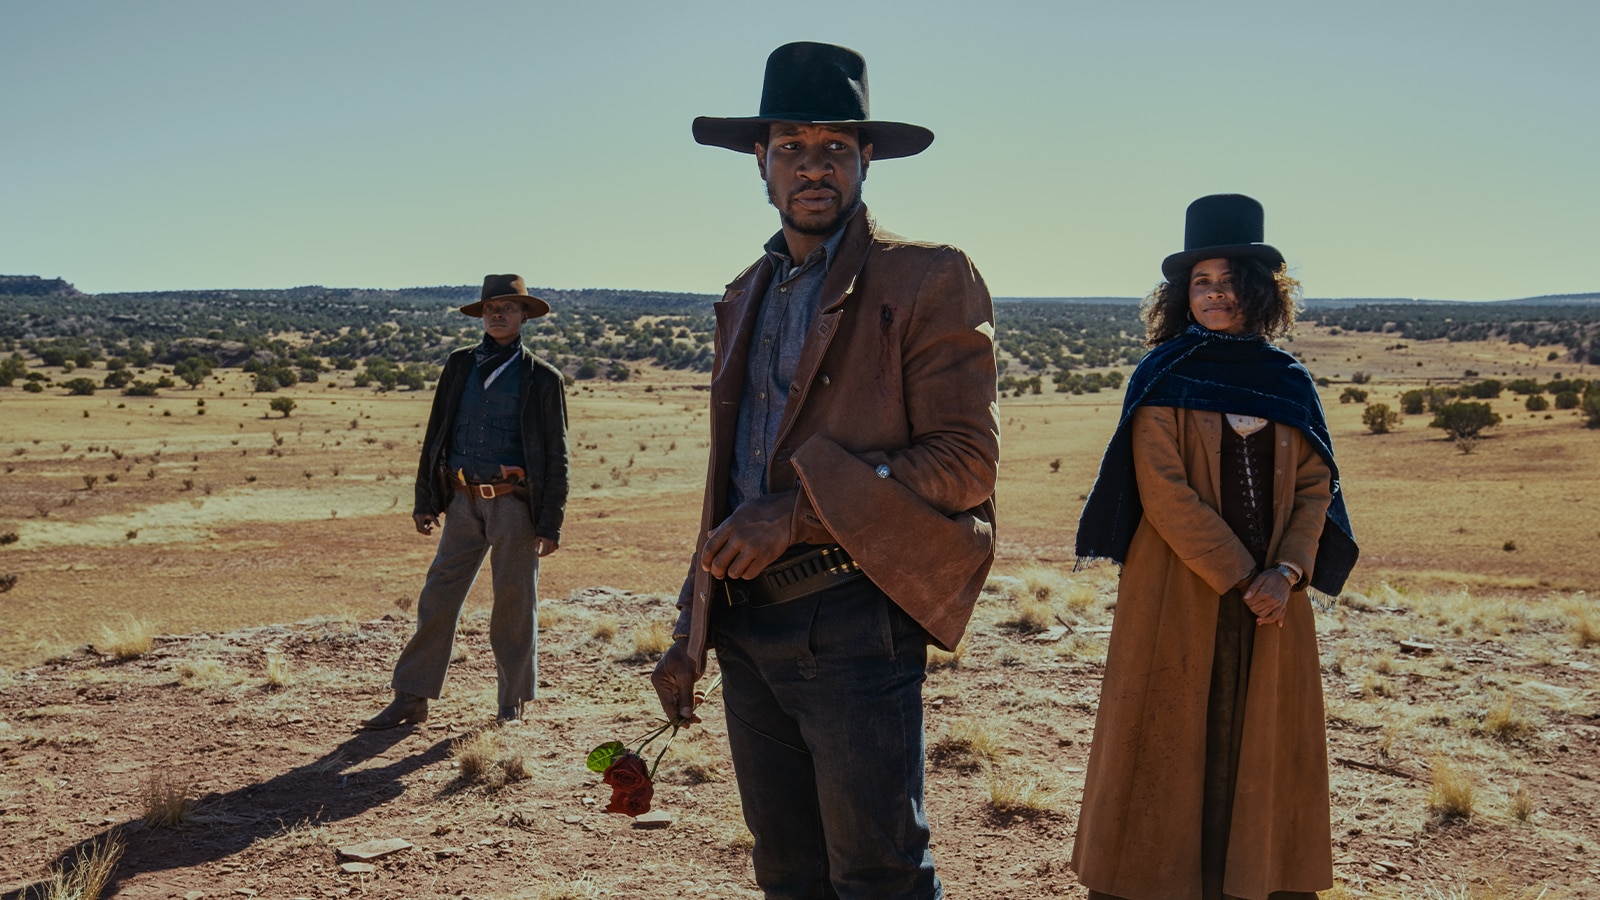 Lifestyle: How The Black Cowboy Figure Became A Pop Culture Phenomenon |  The Journal | MR PORTER